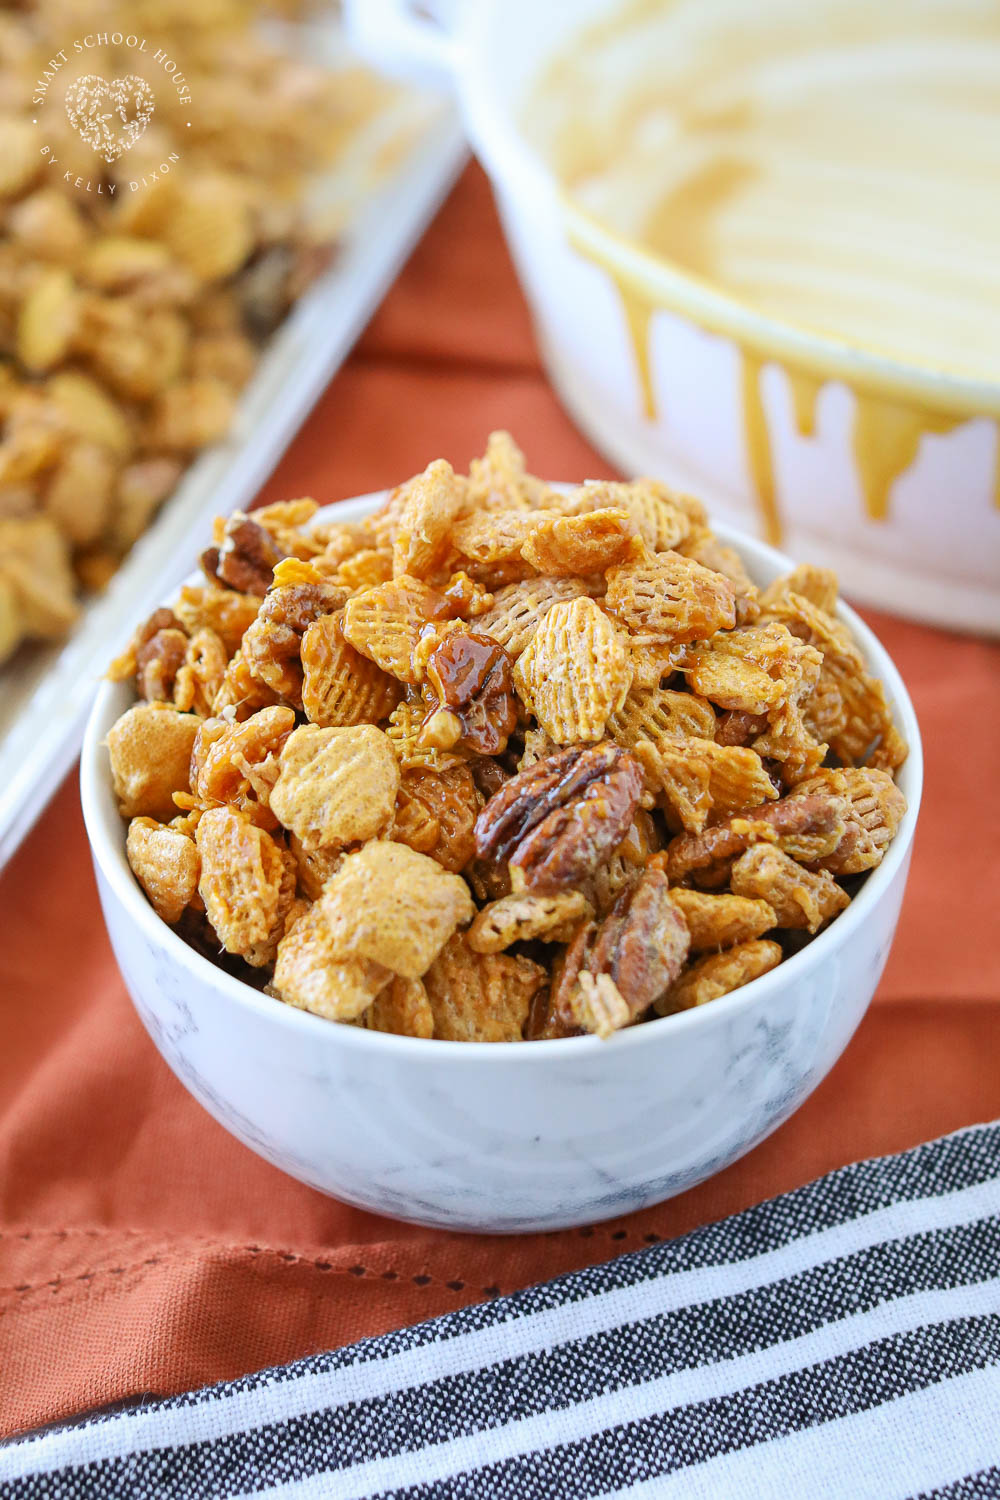 Praline crunch is sweet, salty, and deliciously addicting! Crispix and pecans are covered in a fluffy, buttery, and sugary coating. 